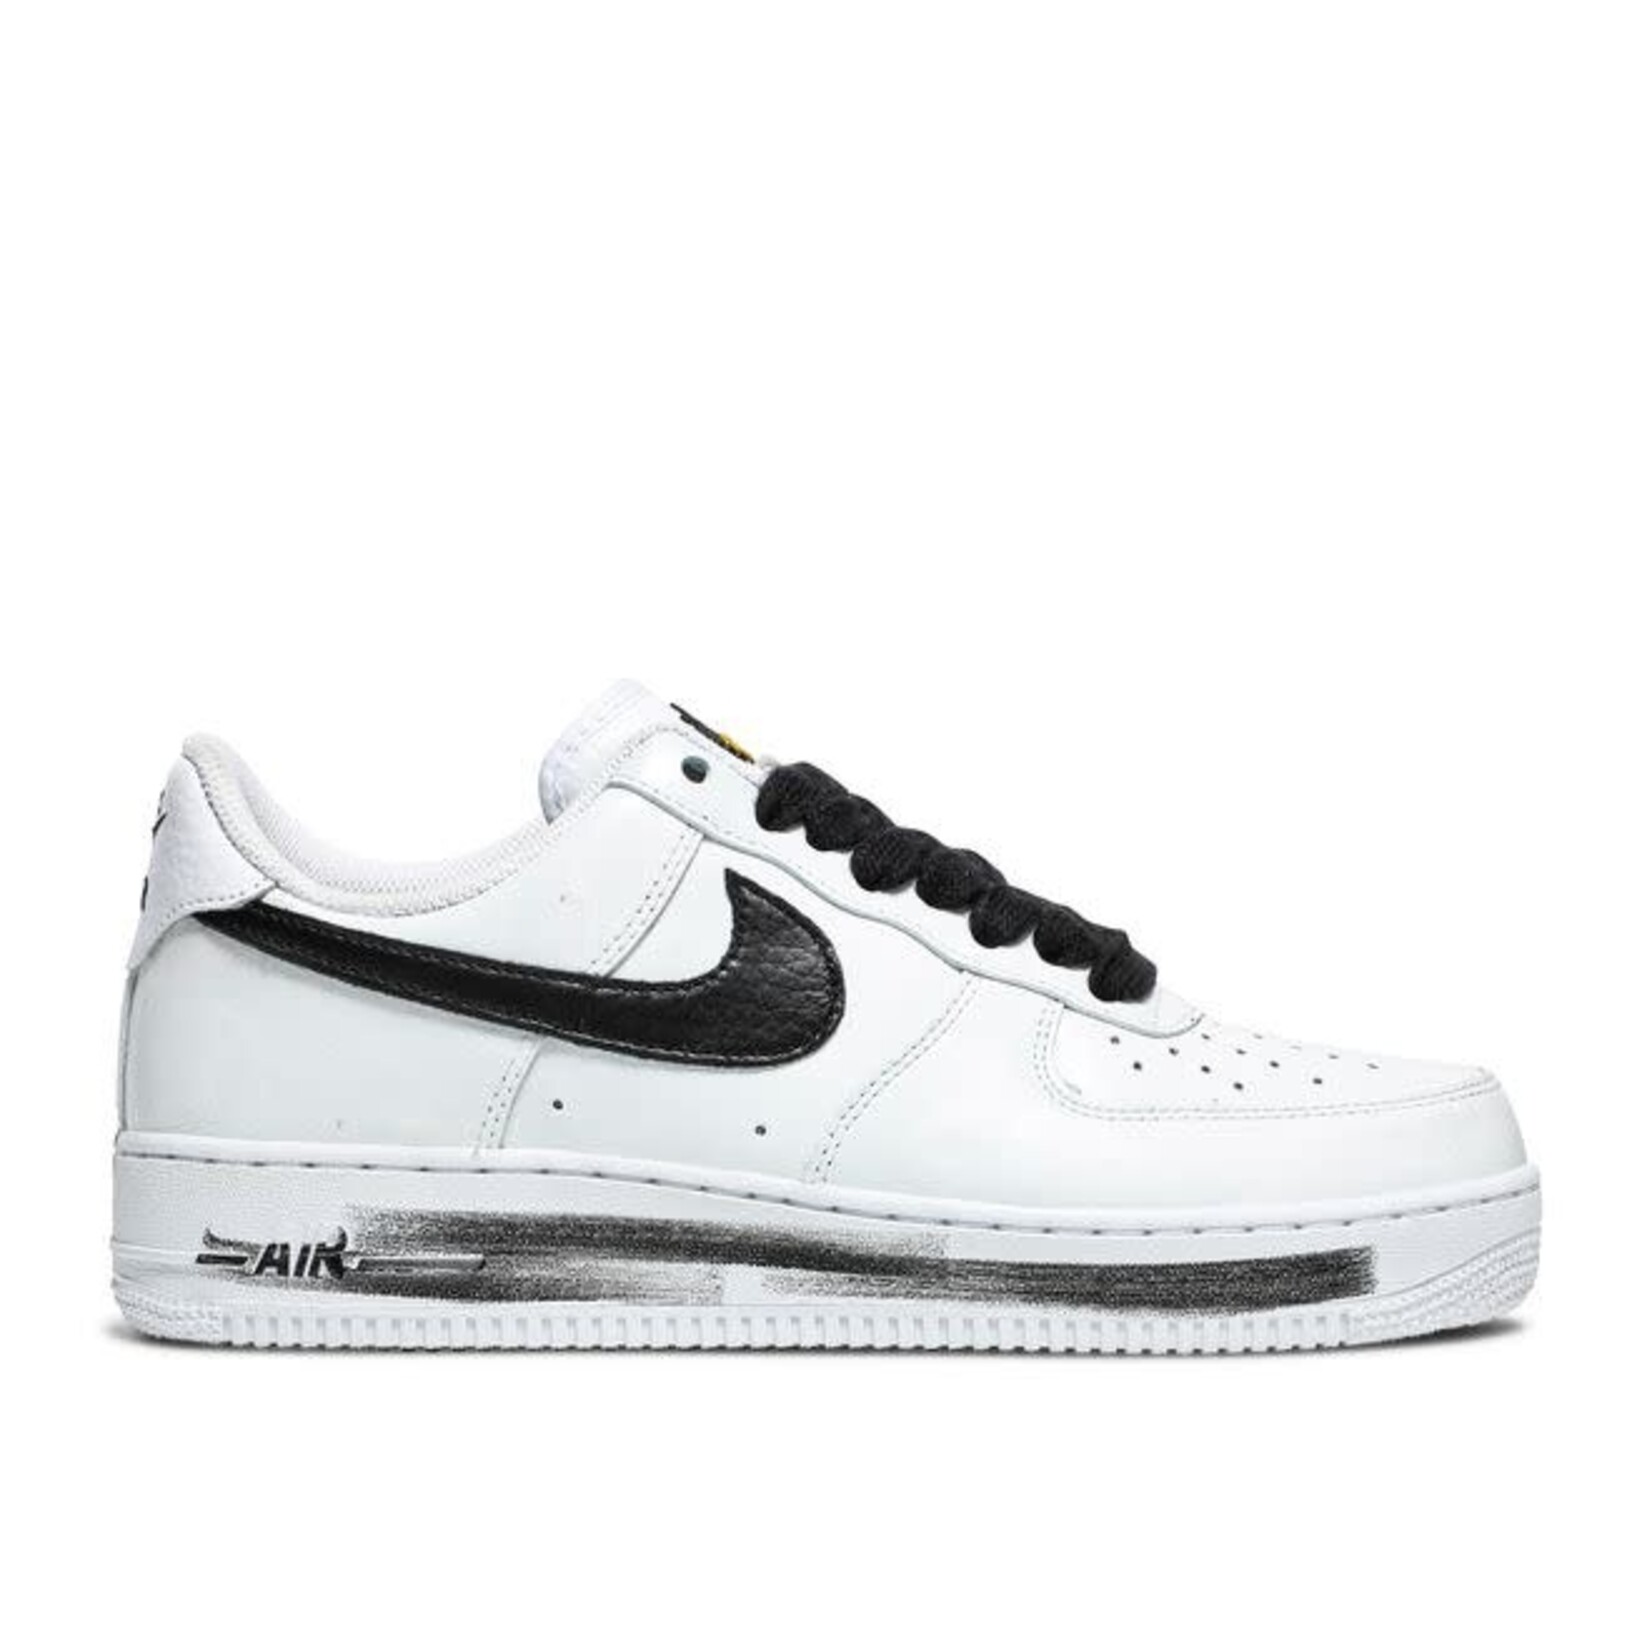 Nike Nike Air Force 1 Low G-Dragon Peaceminusone Para-Noise 2.0 Size 8, DS BRAND NEW